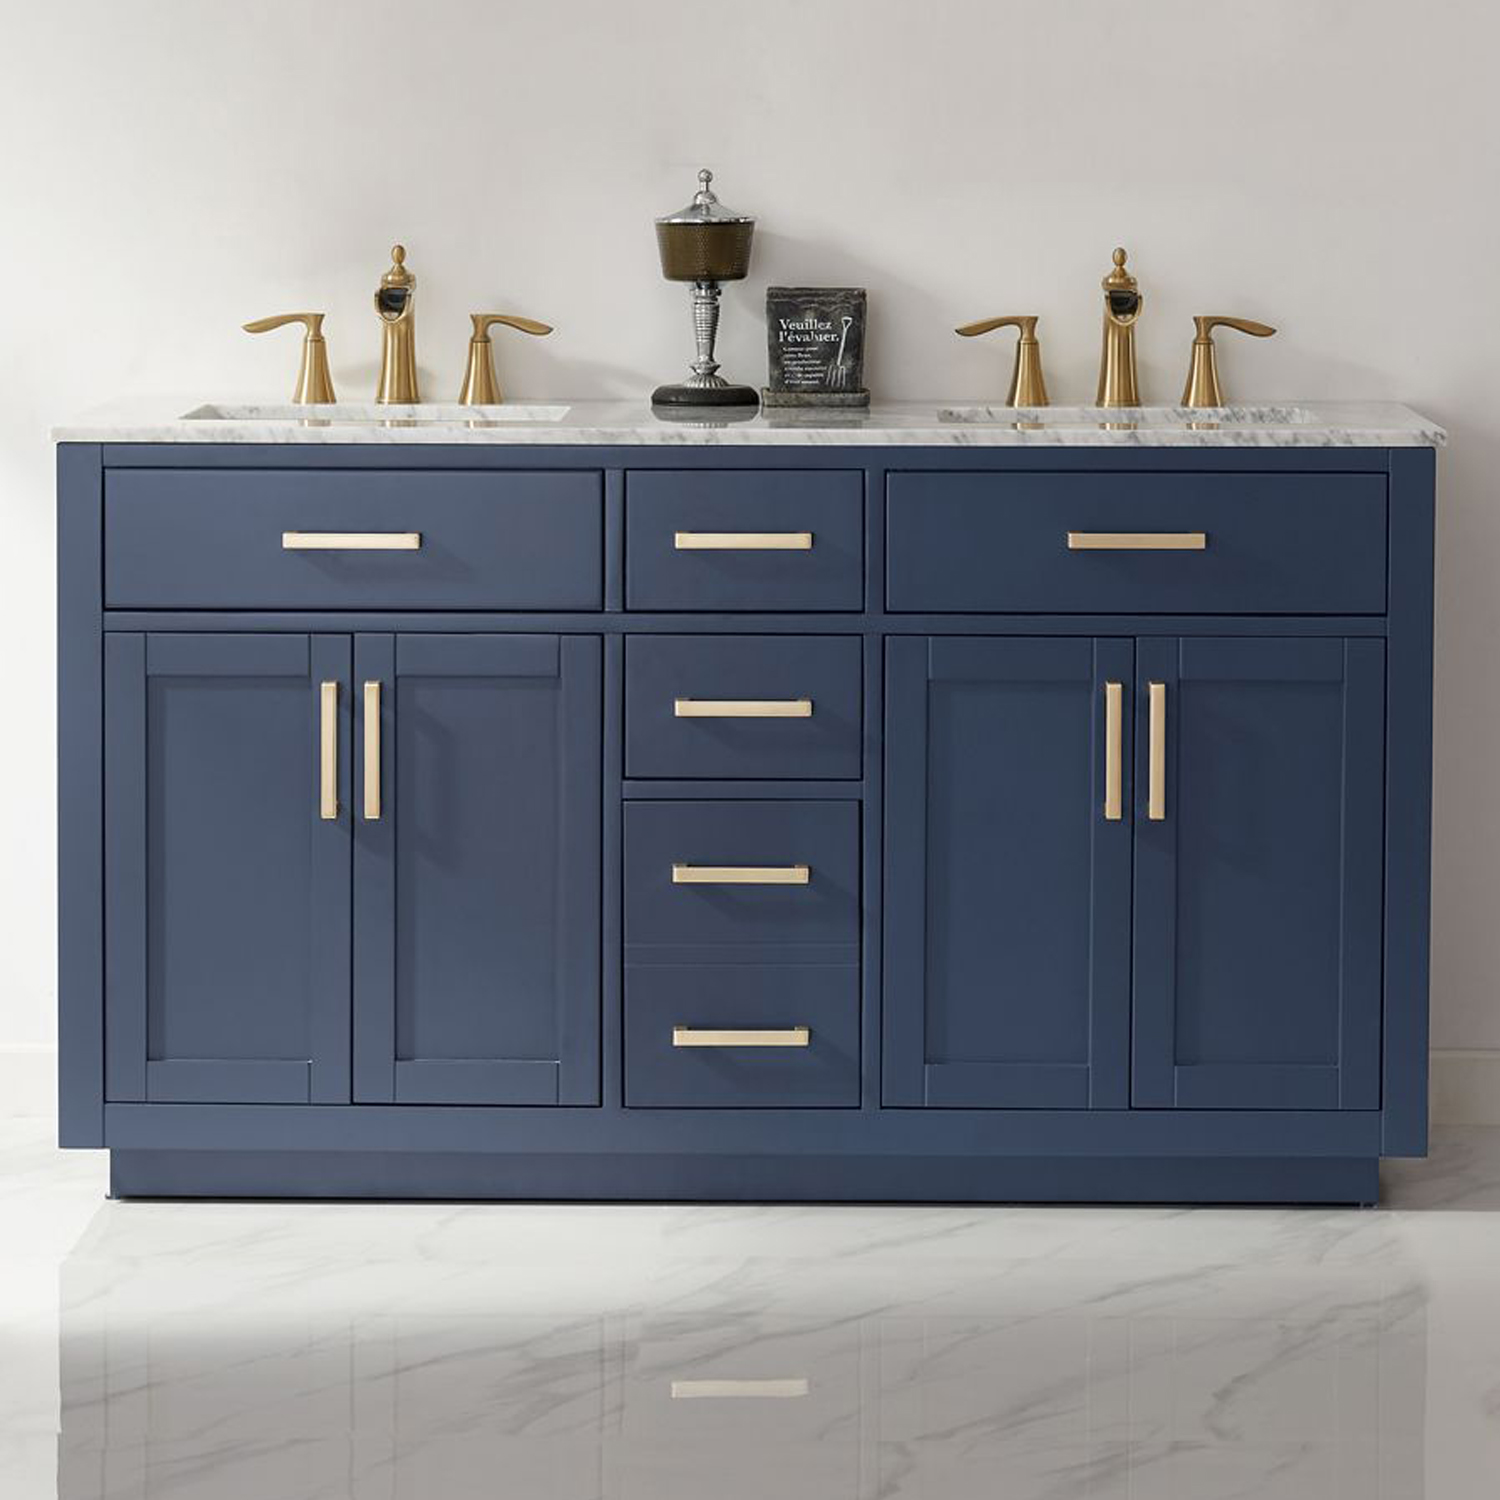 Issac Edwards Collection 60" Double Bathroom Vanity Set in RoyalBlue and Carrara White Marble Countertop without Mirror